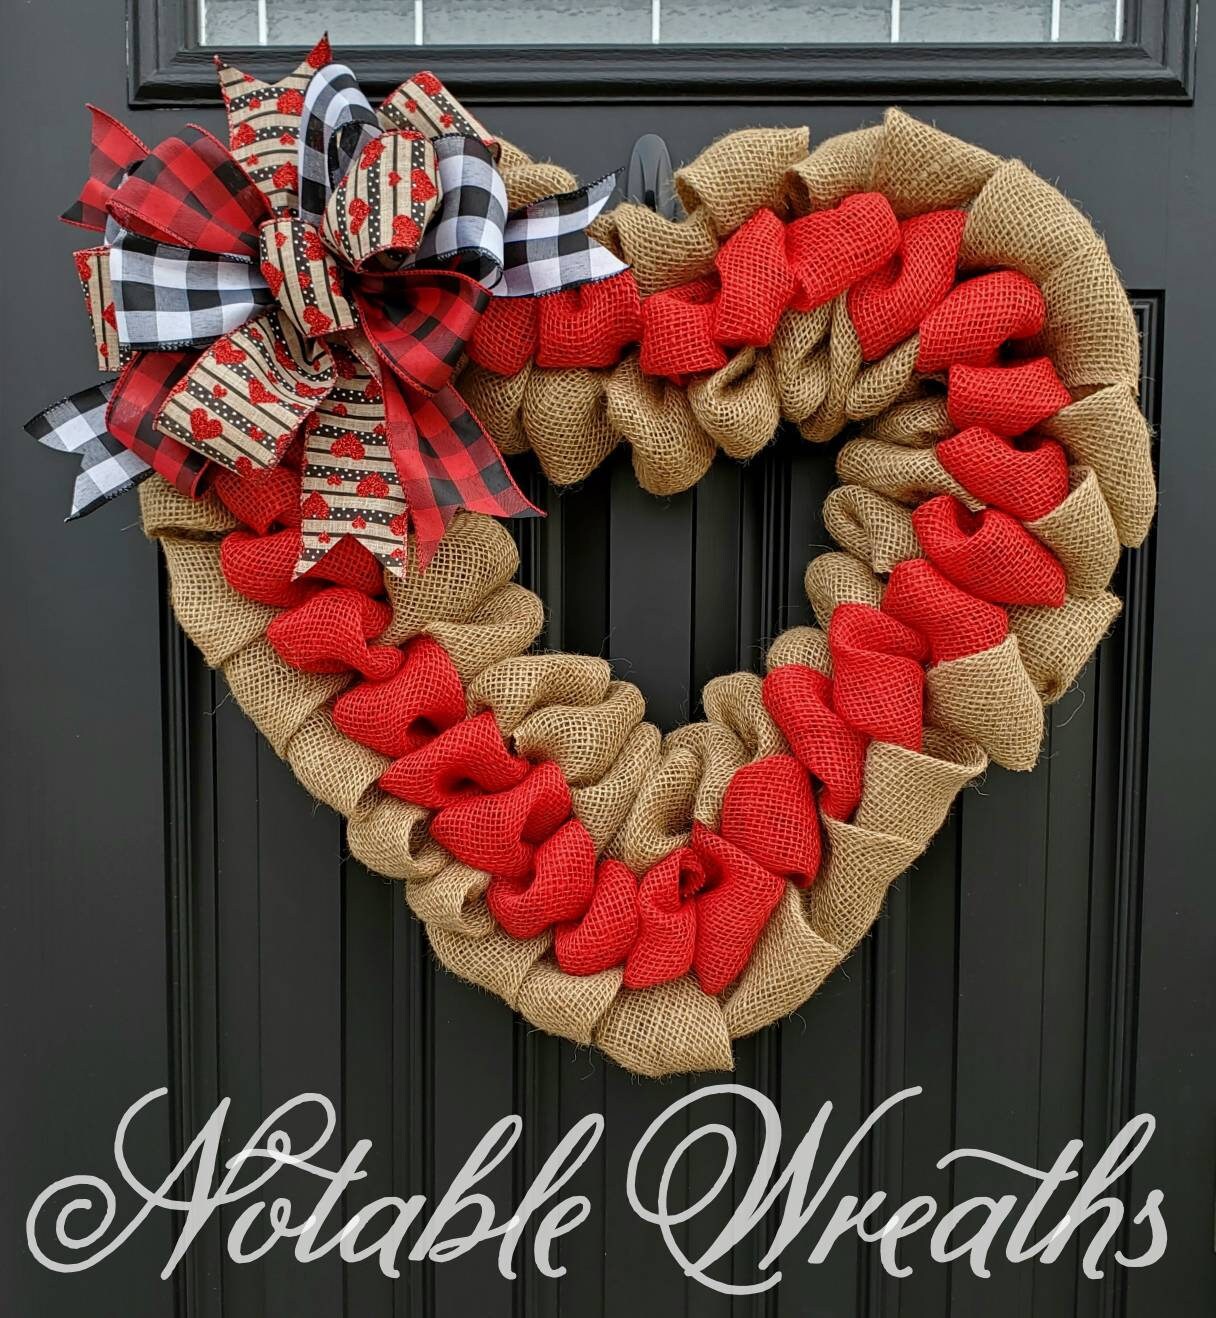 Valentines Day Wreaths, Heart Shaped Wreaths, Heart Wreaths for